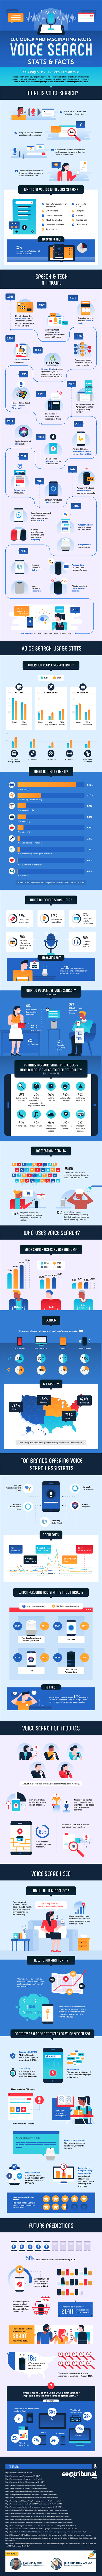 106 Quick and Fascinating Voice Search Facts & Stats